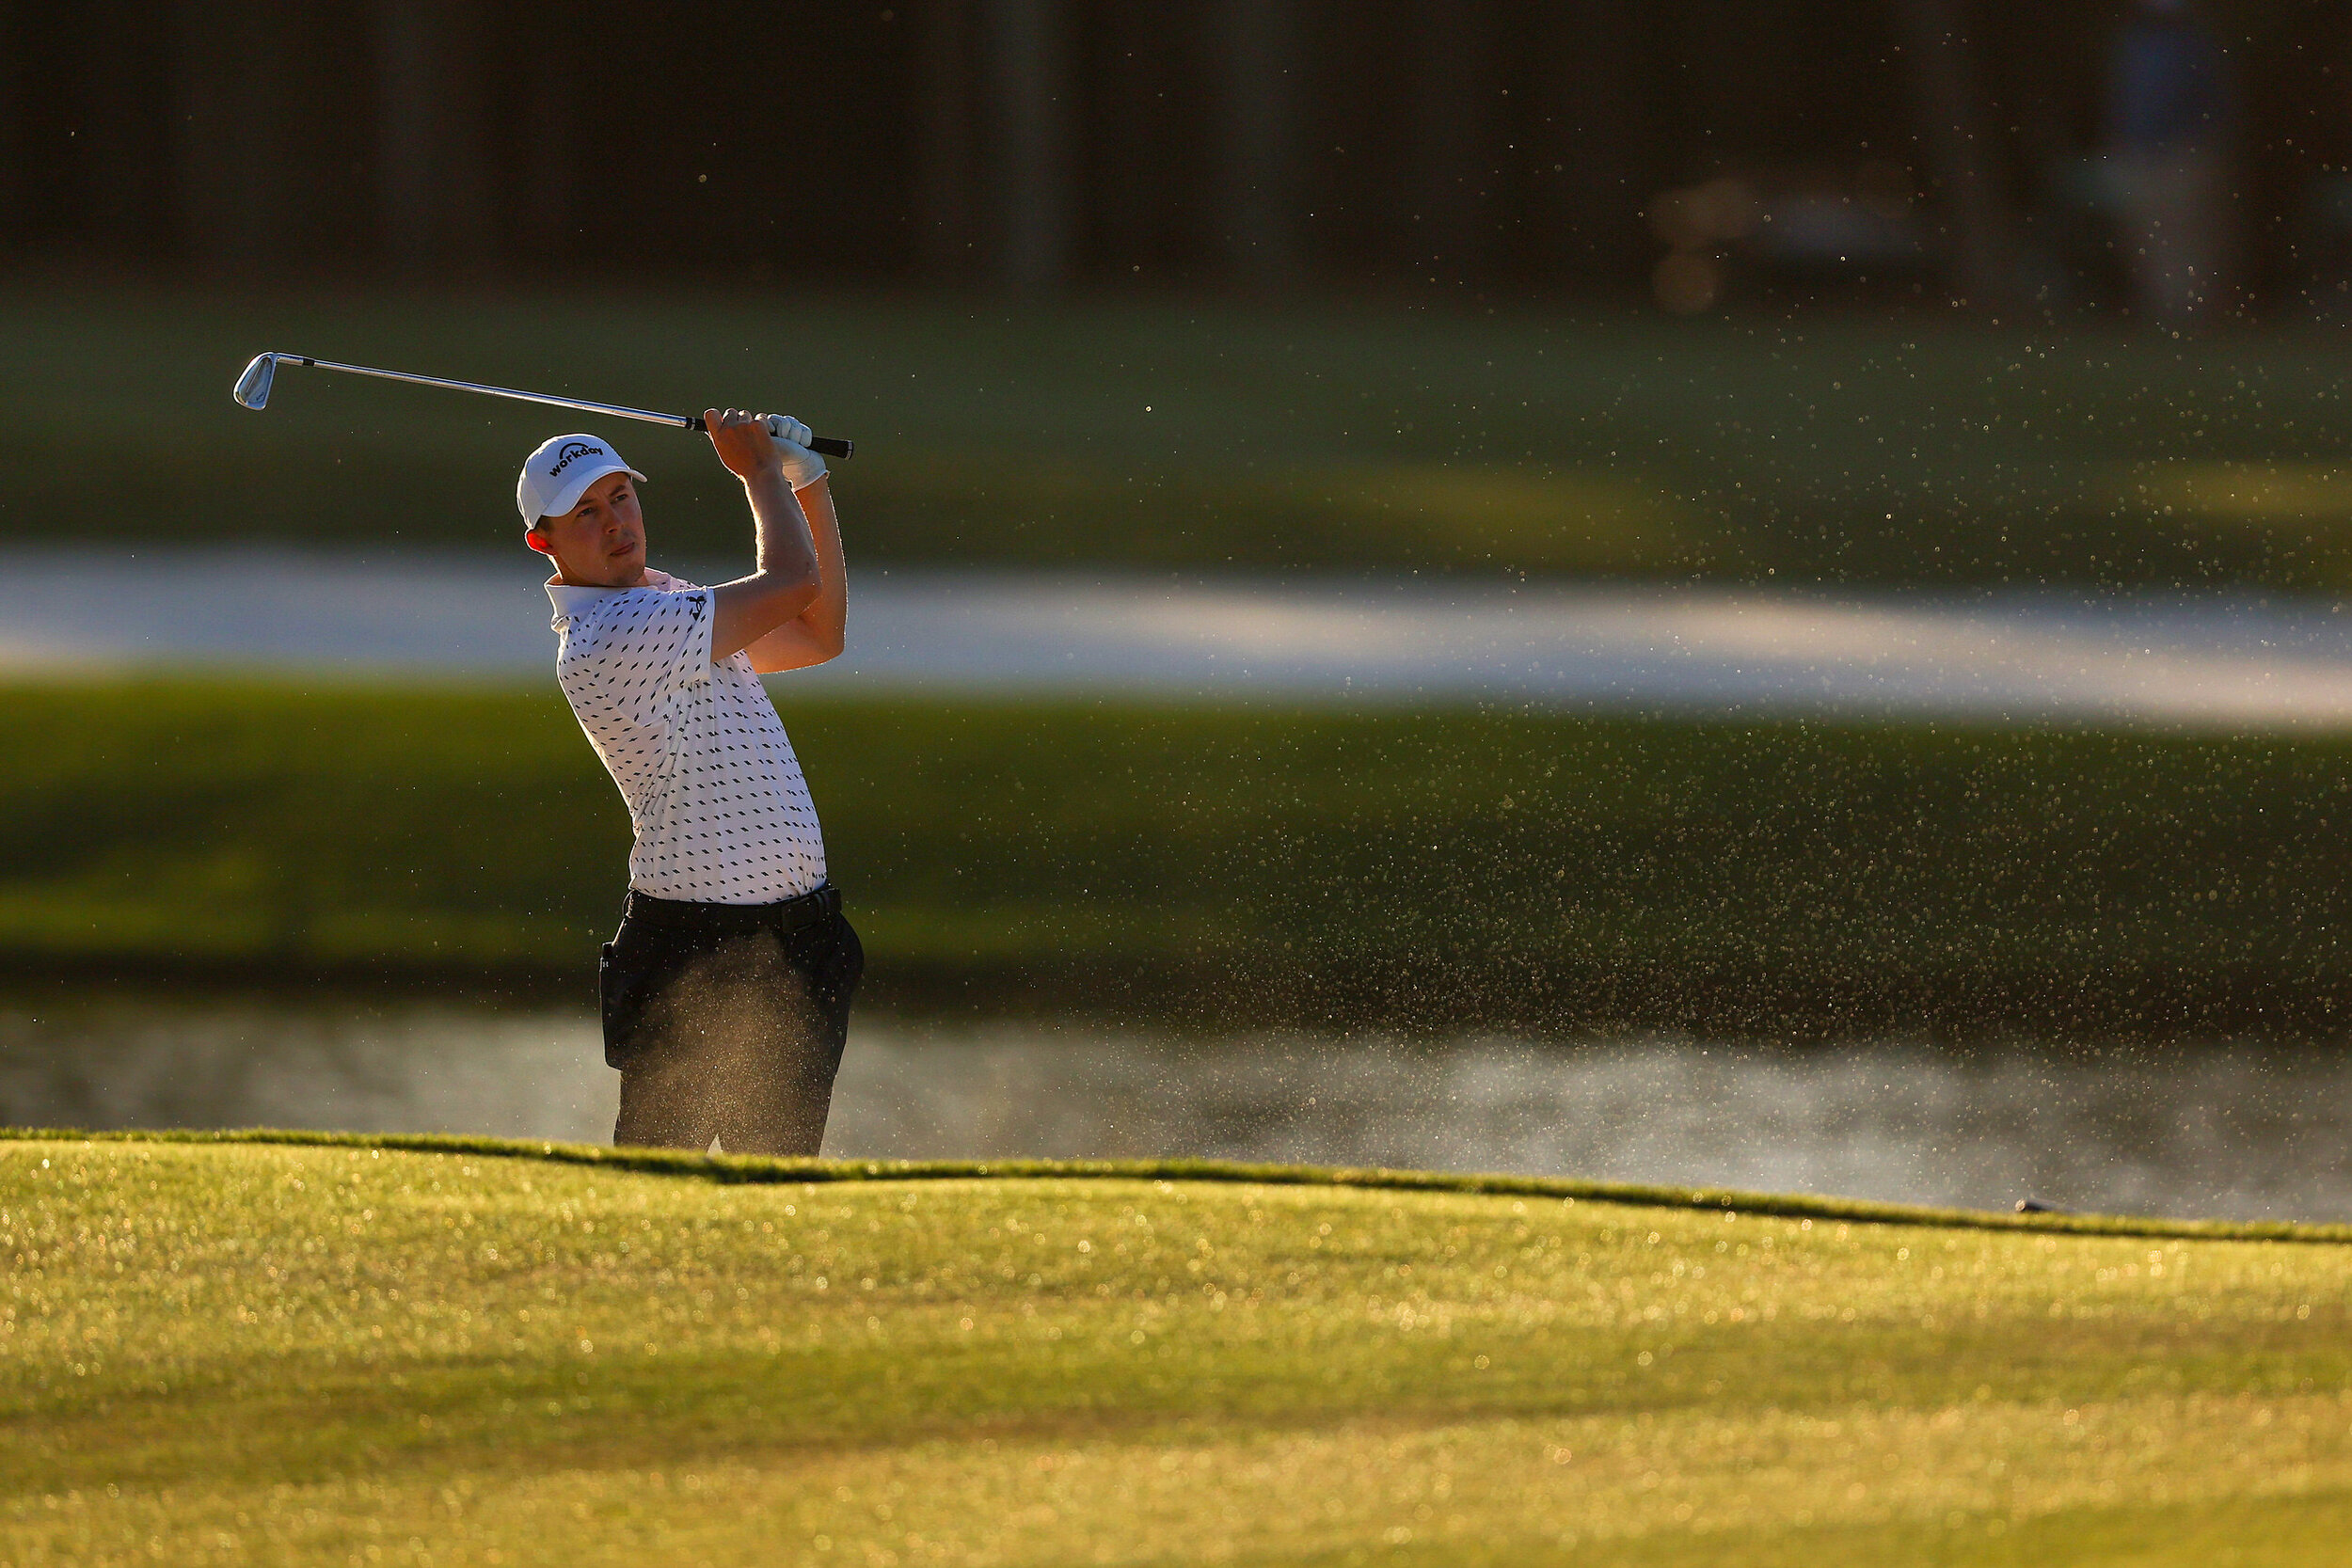  PONTE VEDRA BEACH, FLORIDA - MARCH 12: Matthew Fitzpatrick of England plays a shot on the seventh hole during the second round of THE PLAYERS Championship on THE PLAYERS Stadium Course at TPC Sawgrass on March 12, 2021 in Ponte Vedra Beach, Florida.